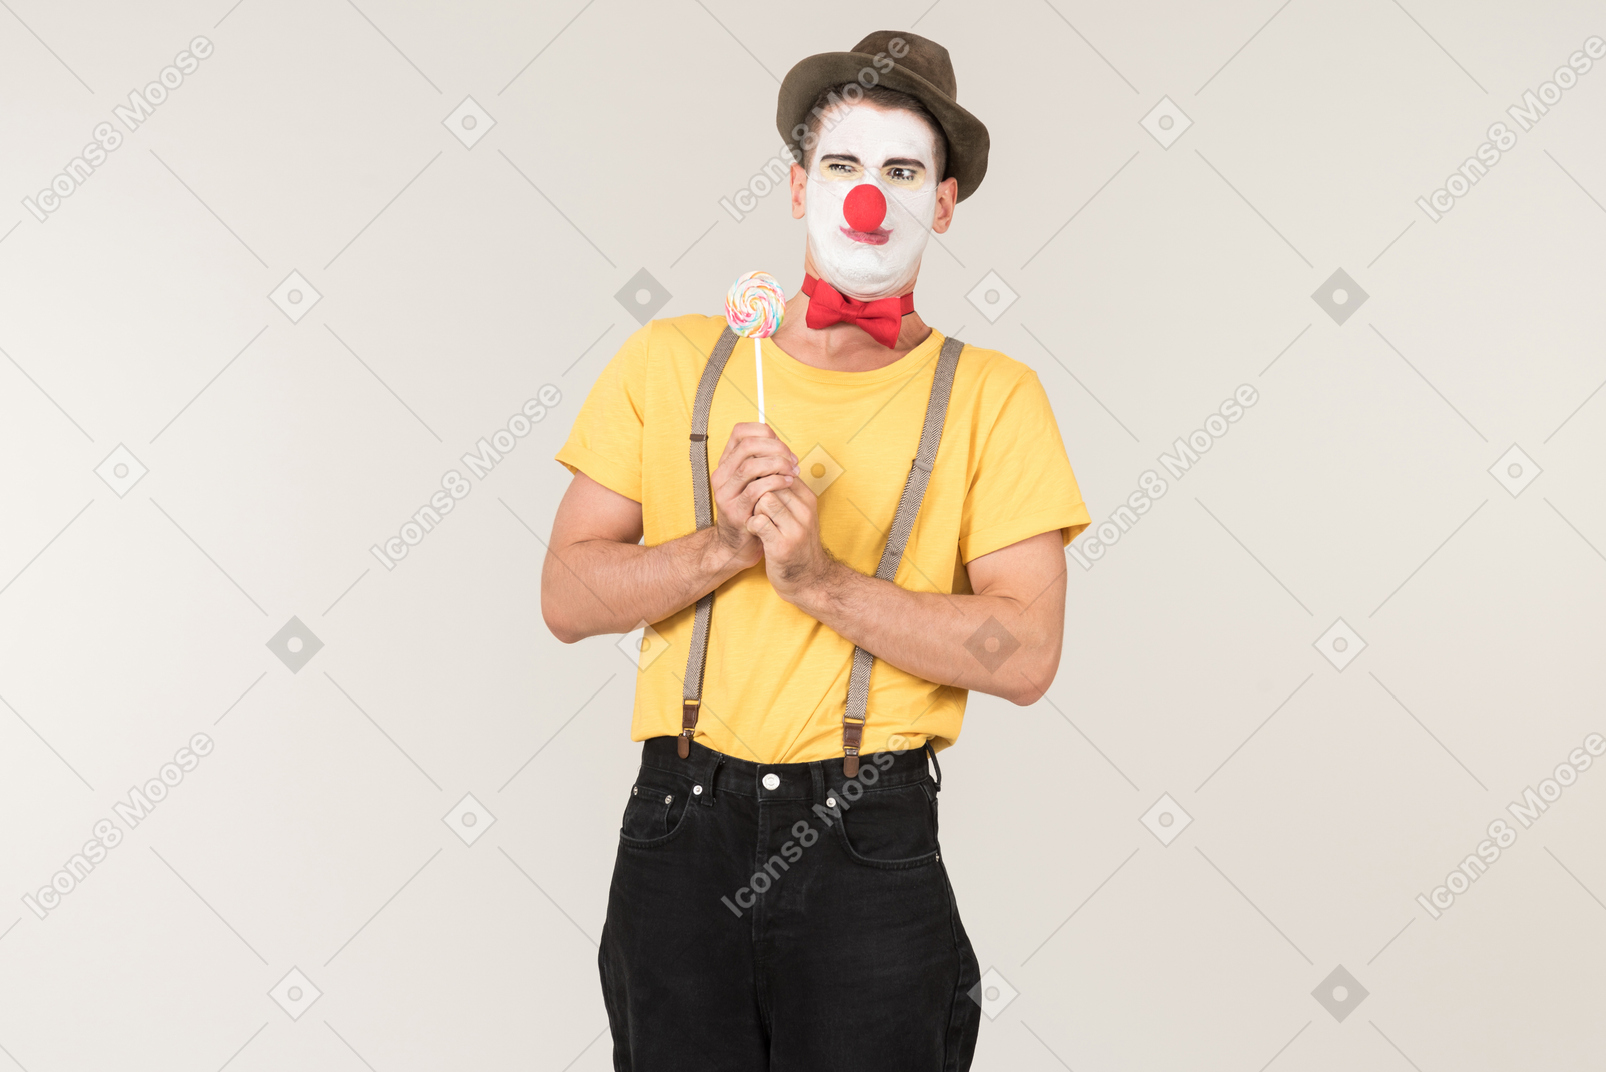 Disgusted male clown holding lollipop